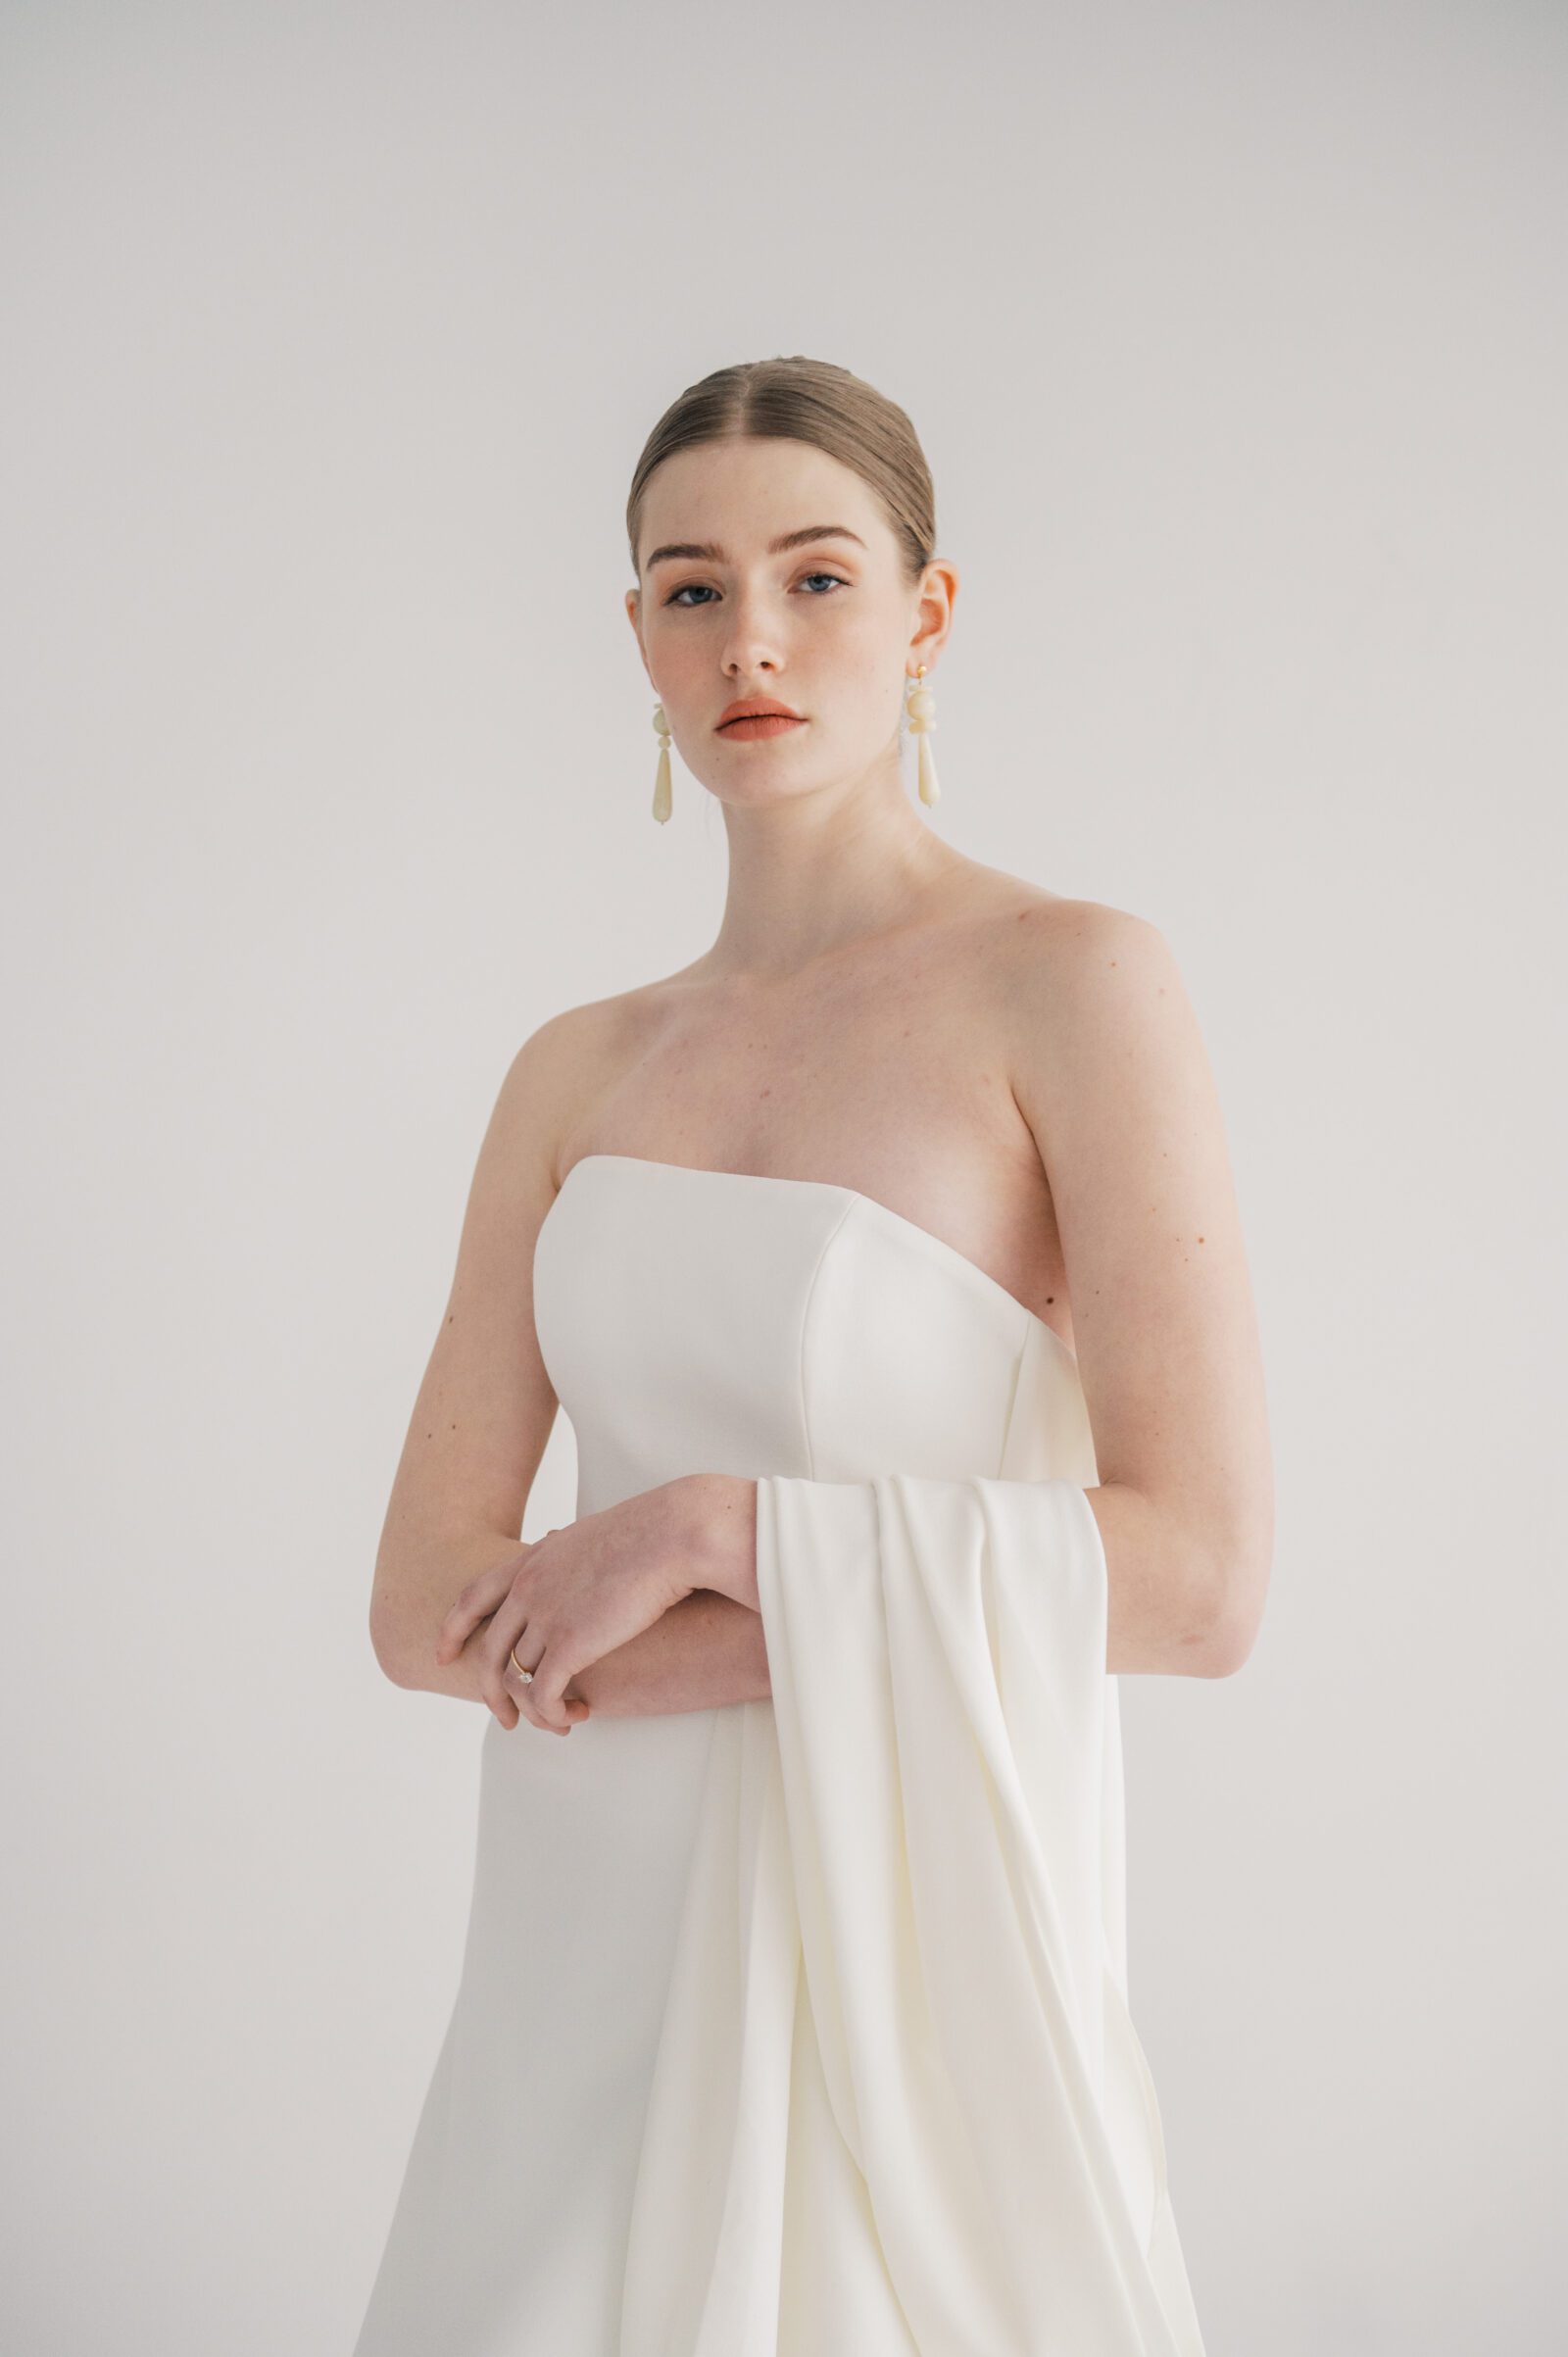 Chic Minimalism meets Grecian Elegance in This Contemporary Wedding ...